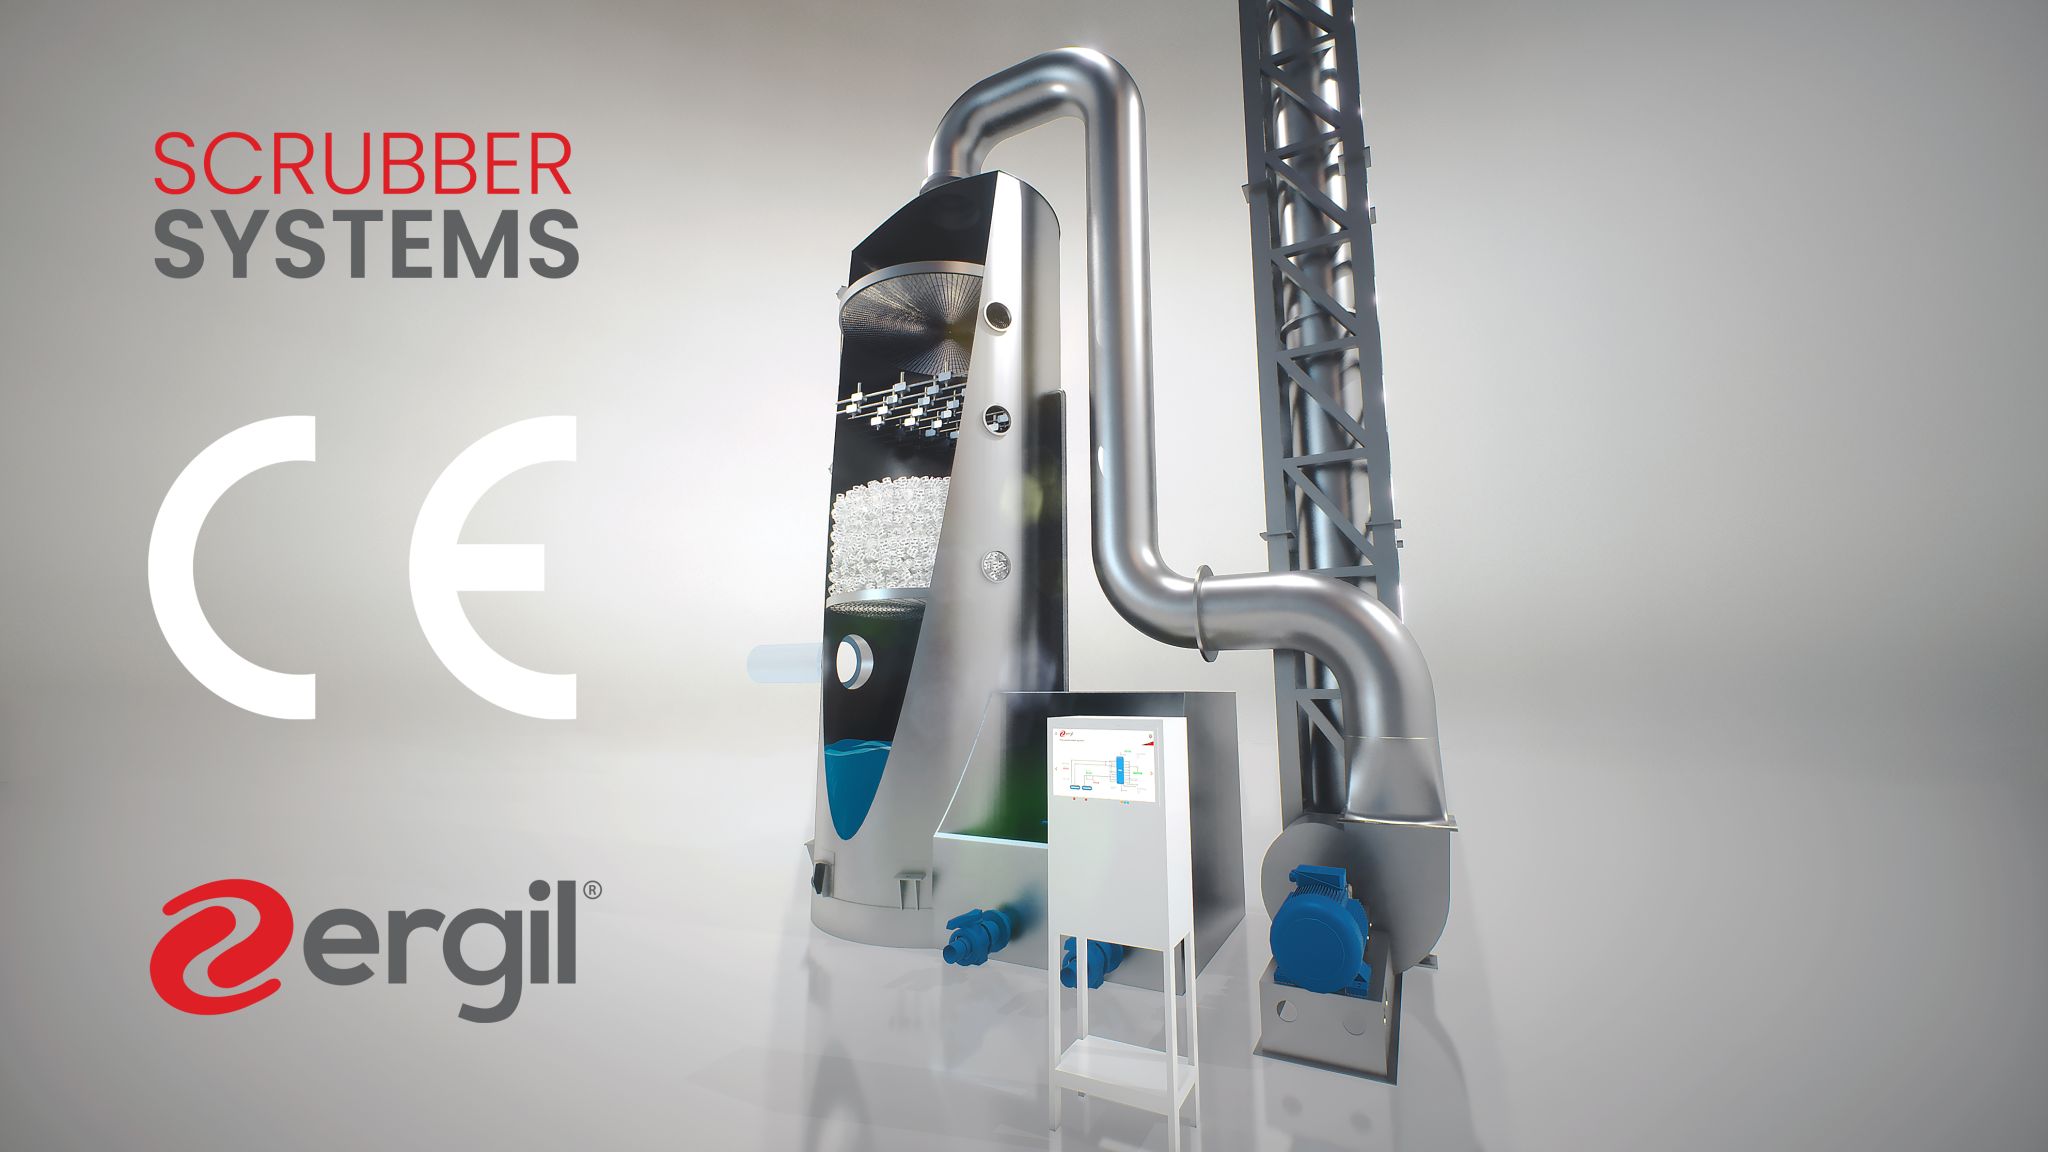 Äager GmbH, has achieved CE certification for Scrubber Systems 77